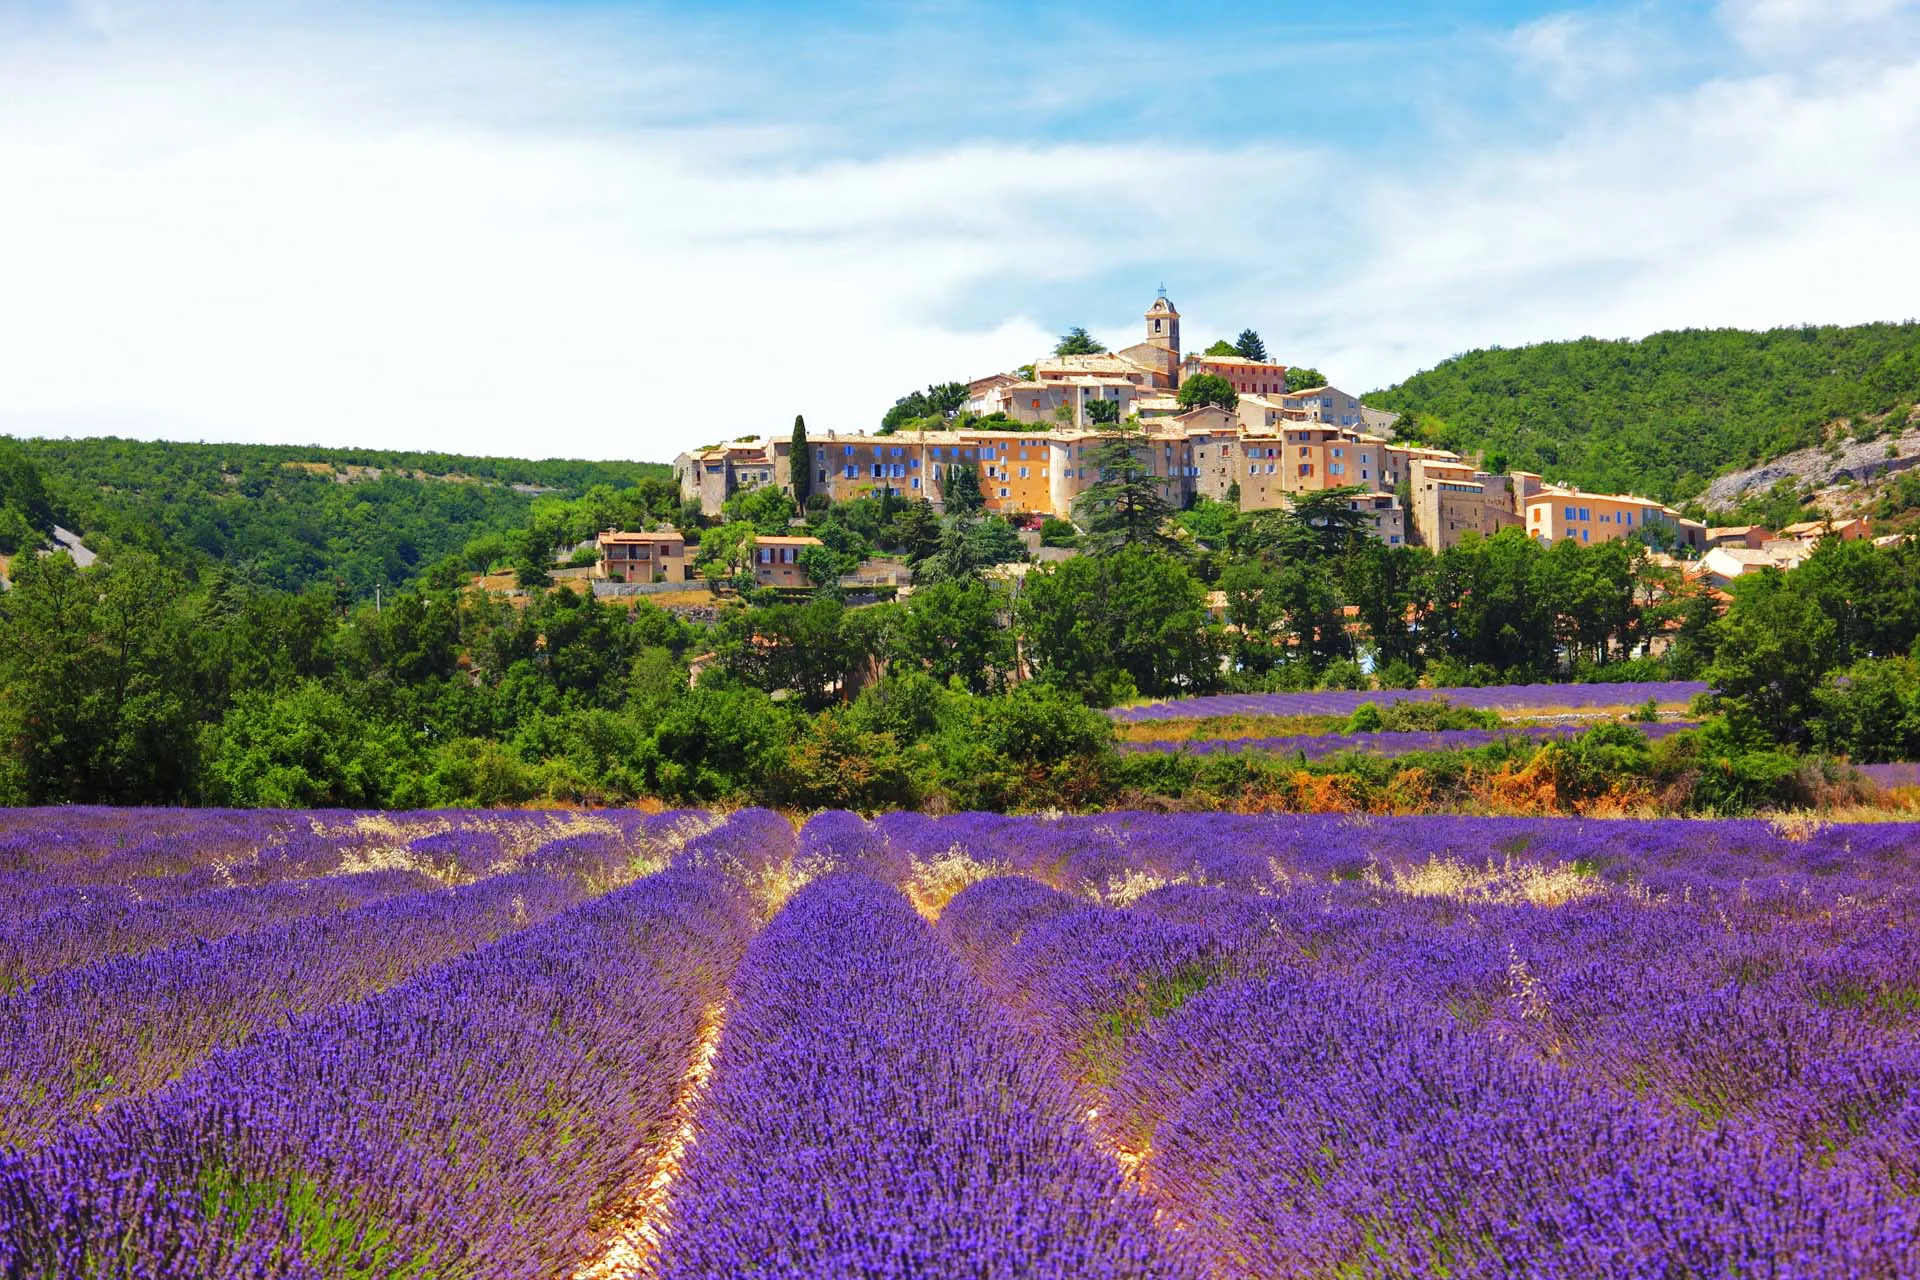 Experience the lavender fields of Provence on a luxury getaway in France this summer